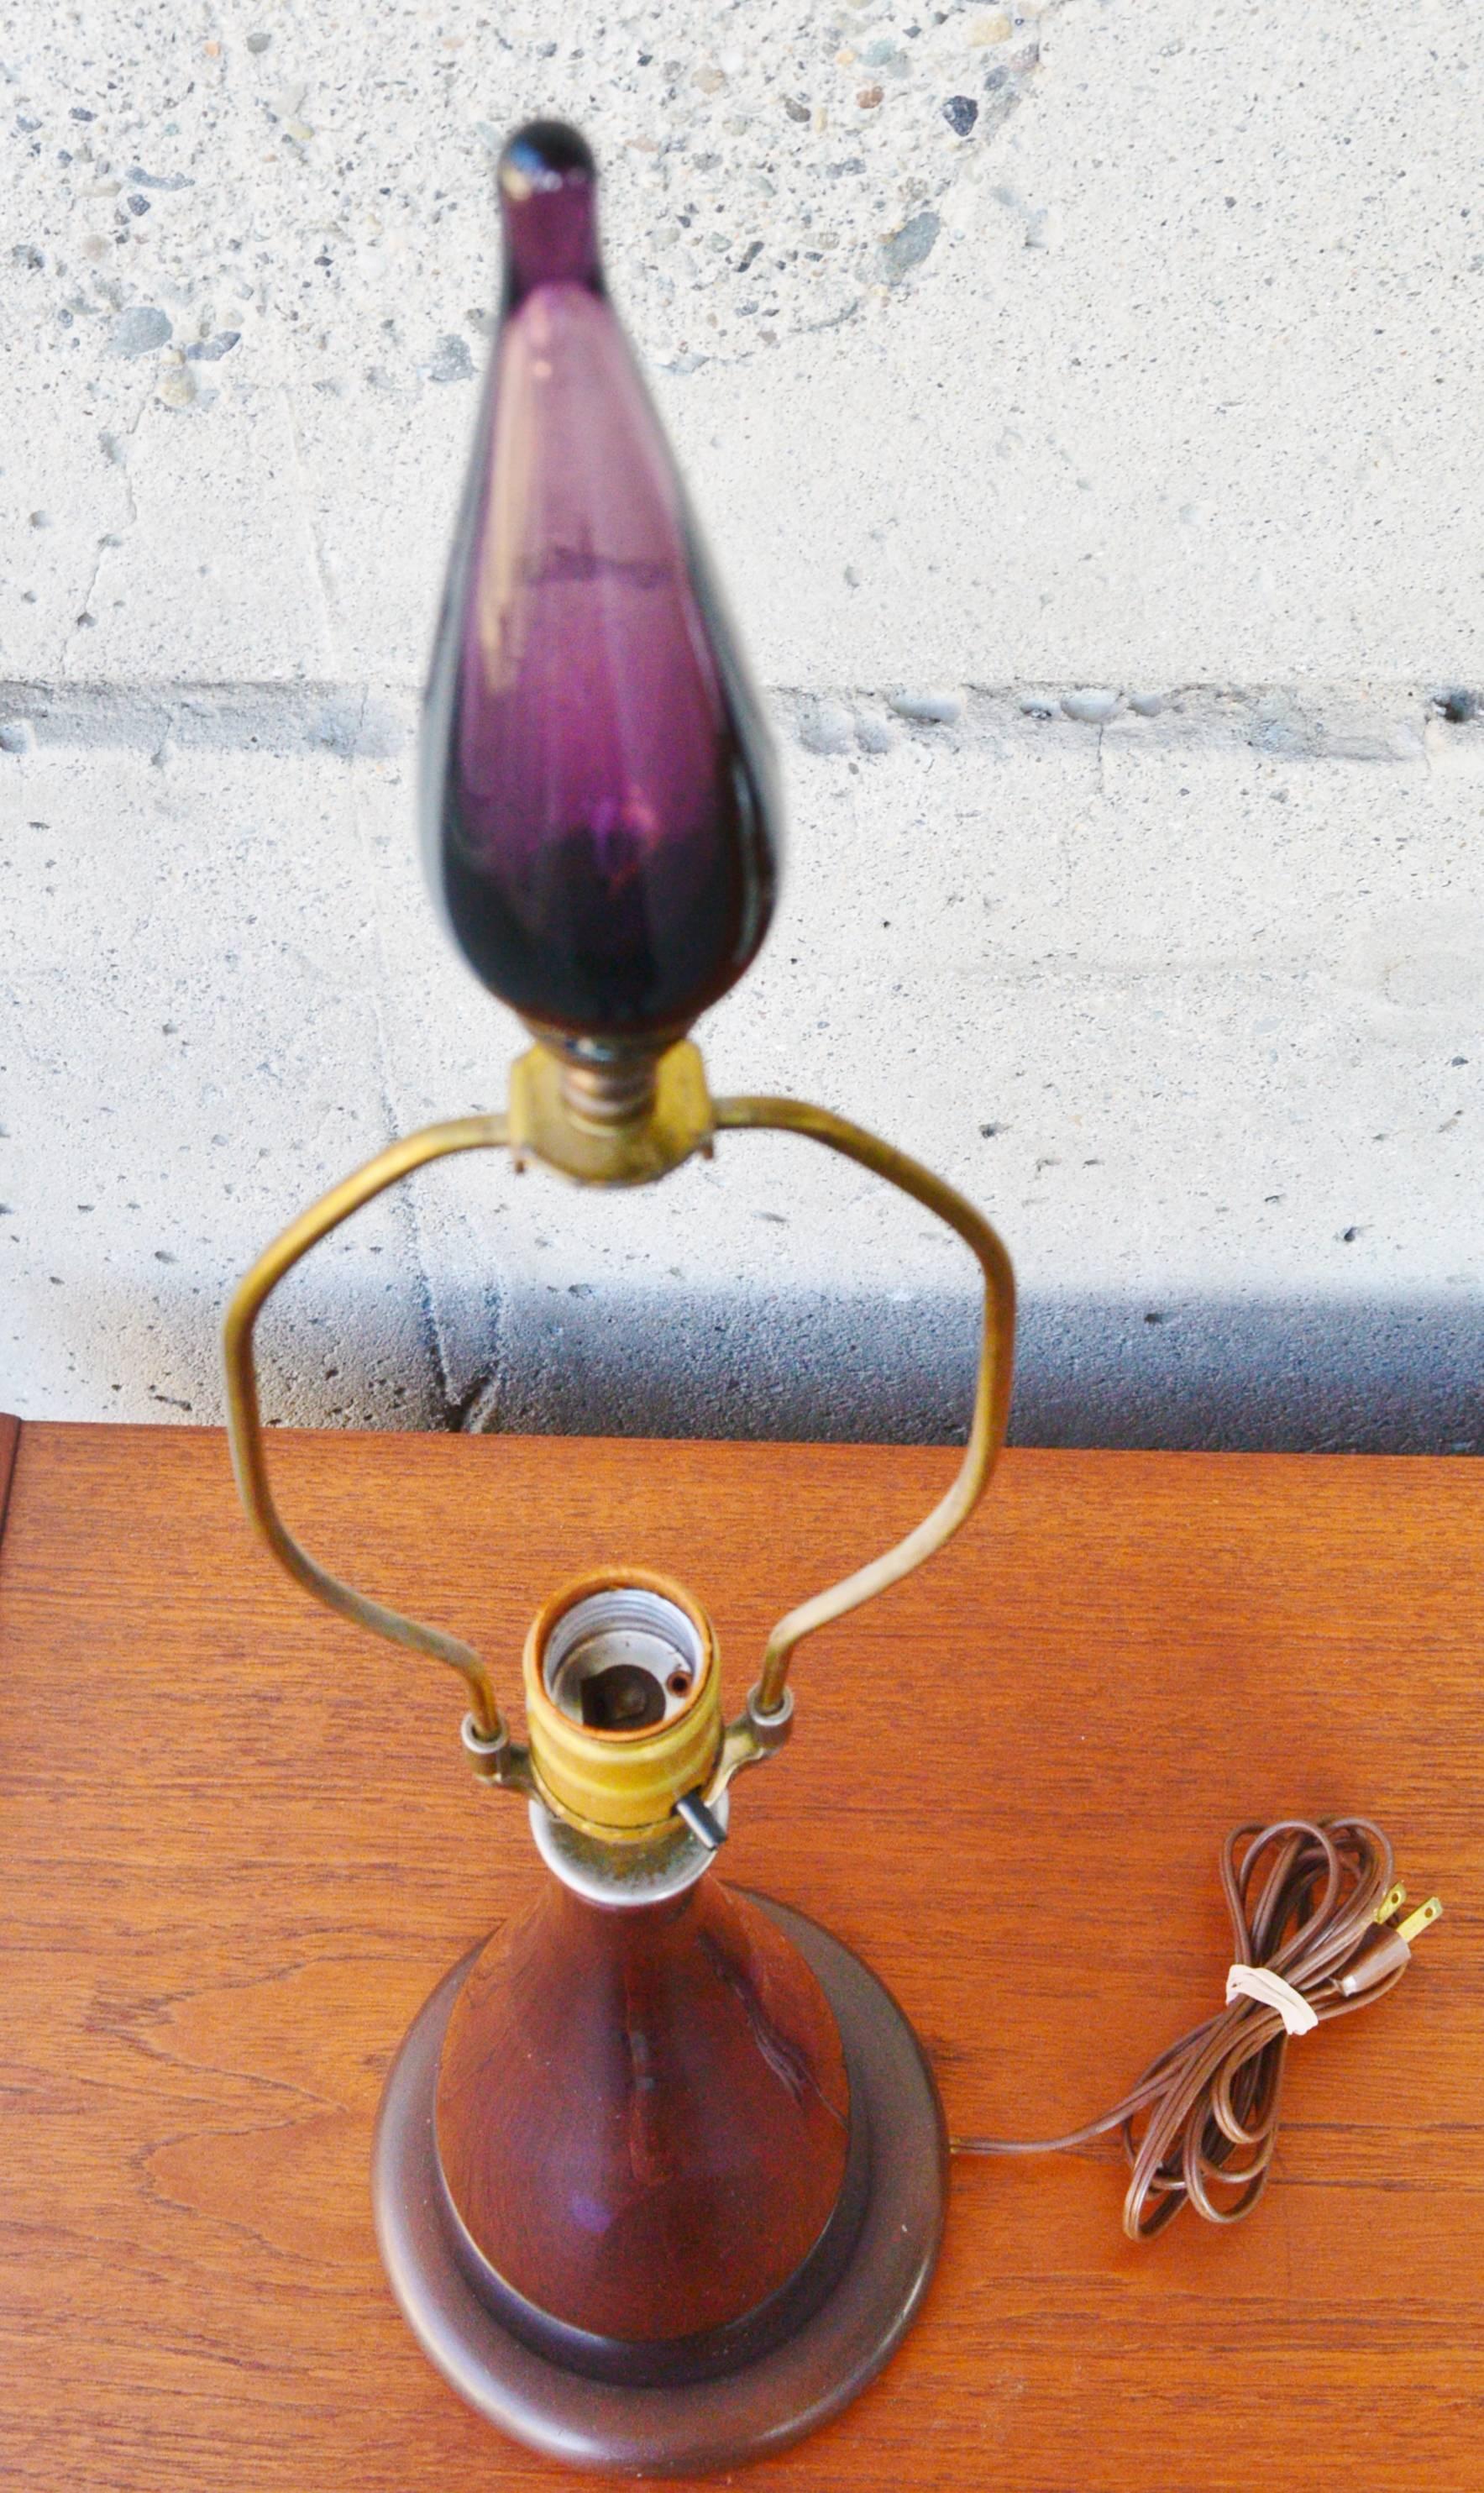 This gorgeous Mid-Century Modern wine bottle shaped Blenko handblown glass lamp is in a rare shade of amethyst and includes the original tear-drop shaped finial and harp and circular wood base. In excellent condition except for wear to the metal CAP